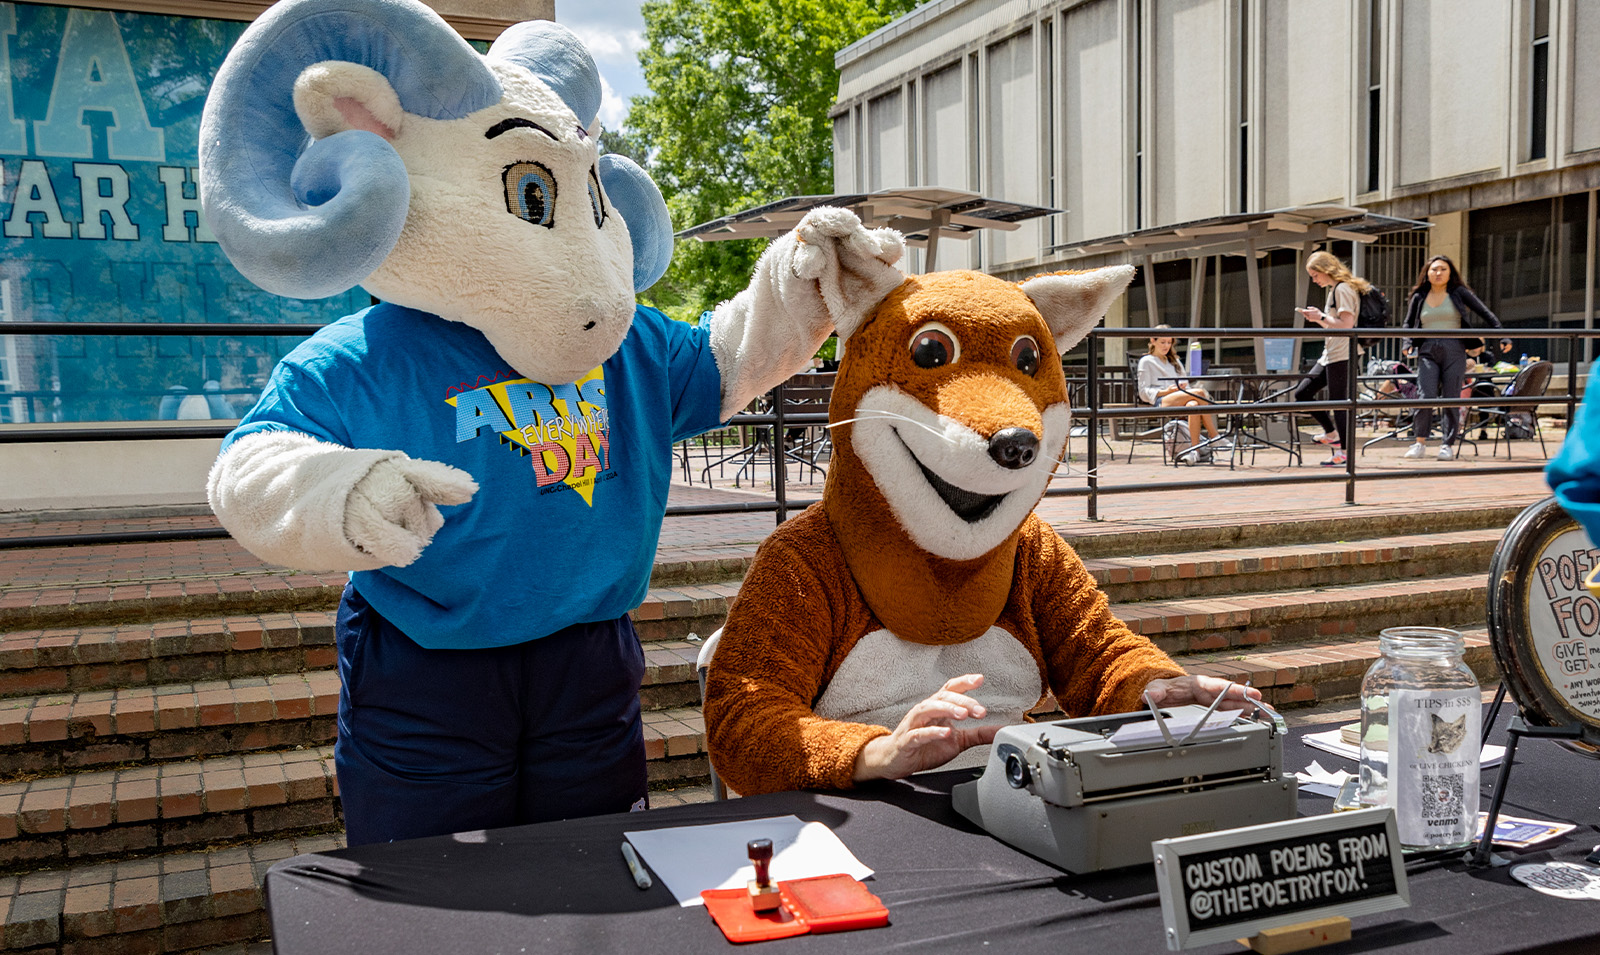 A ram mascot, Rameses Jr., holding the ear of another mascot, Poetry Fox, at Arts Everywhere Day.